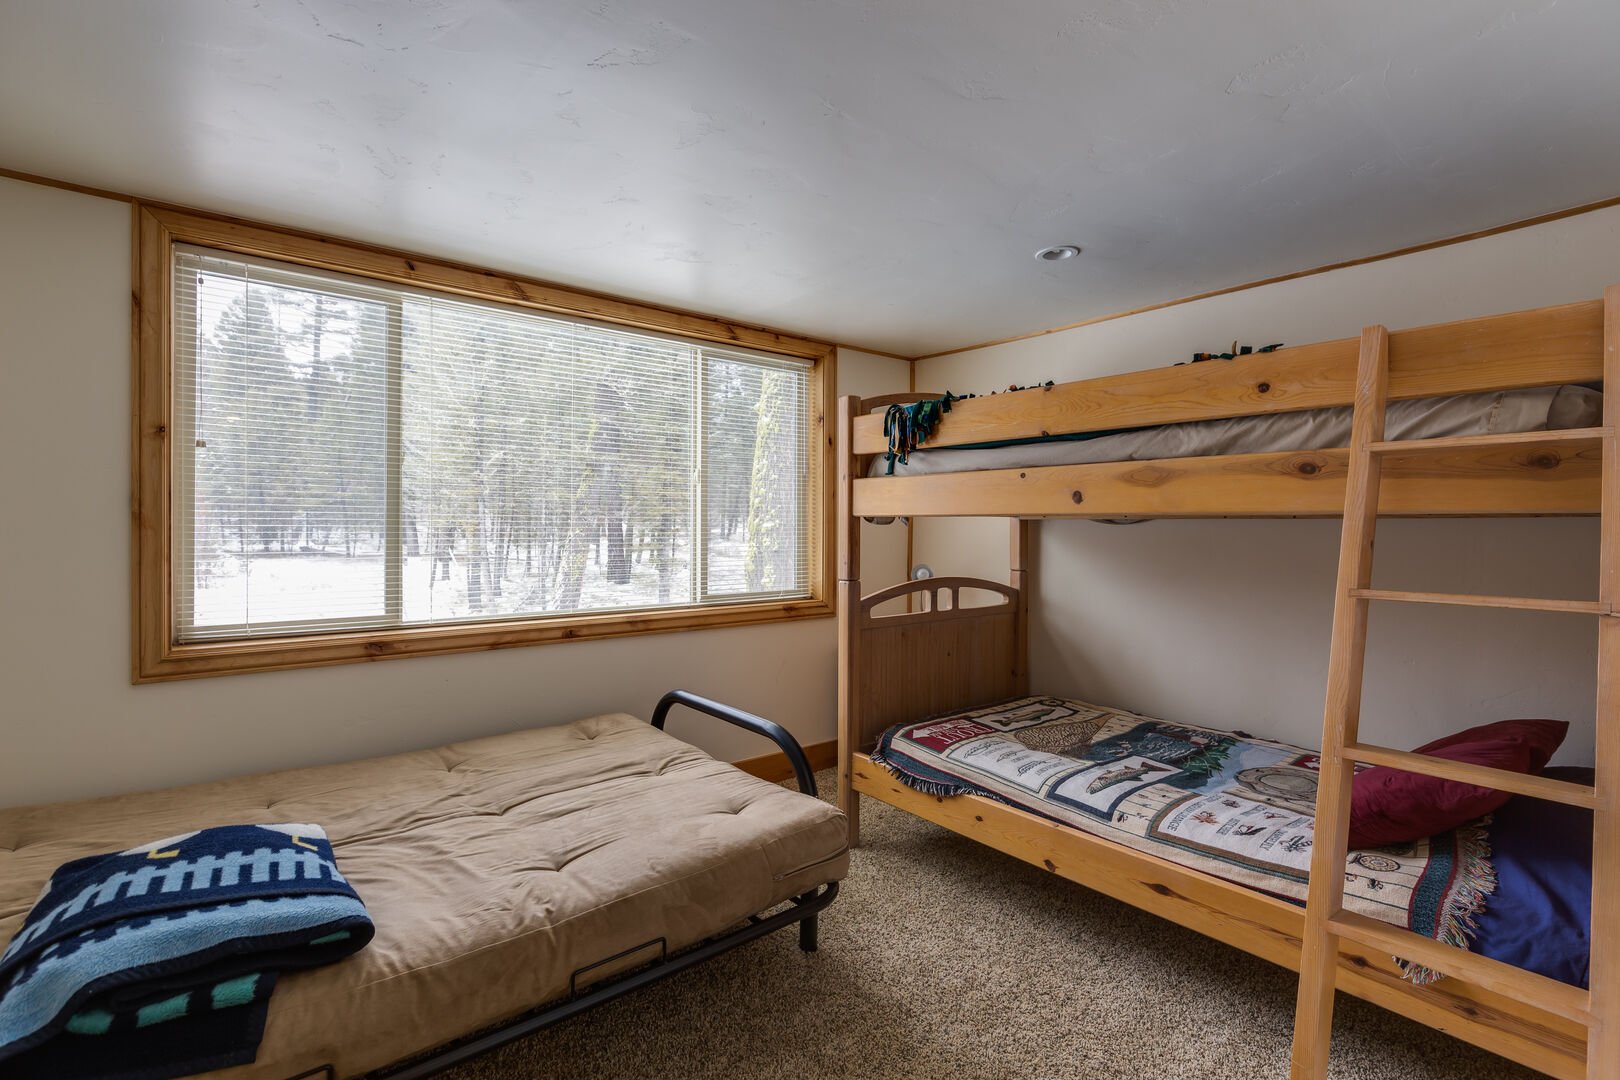 Roger Dodger - accommodations above garage (NOT available in winter. See description for availability). Bedroom w/ a single over single bunk bed and a twin futon. Bedroom # 4.